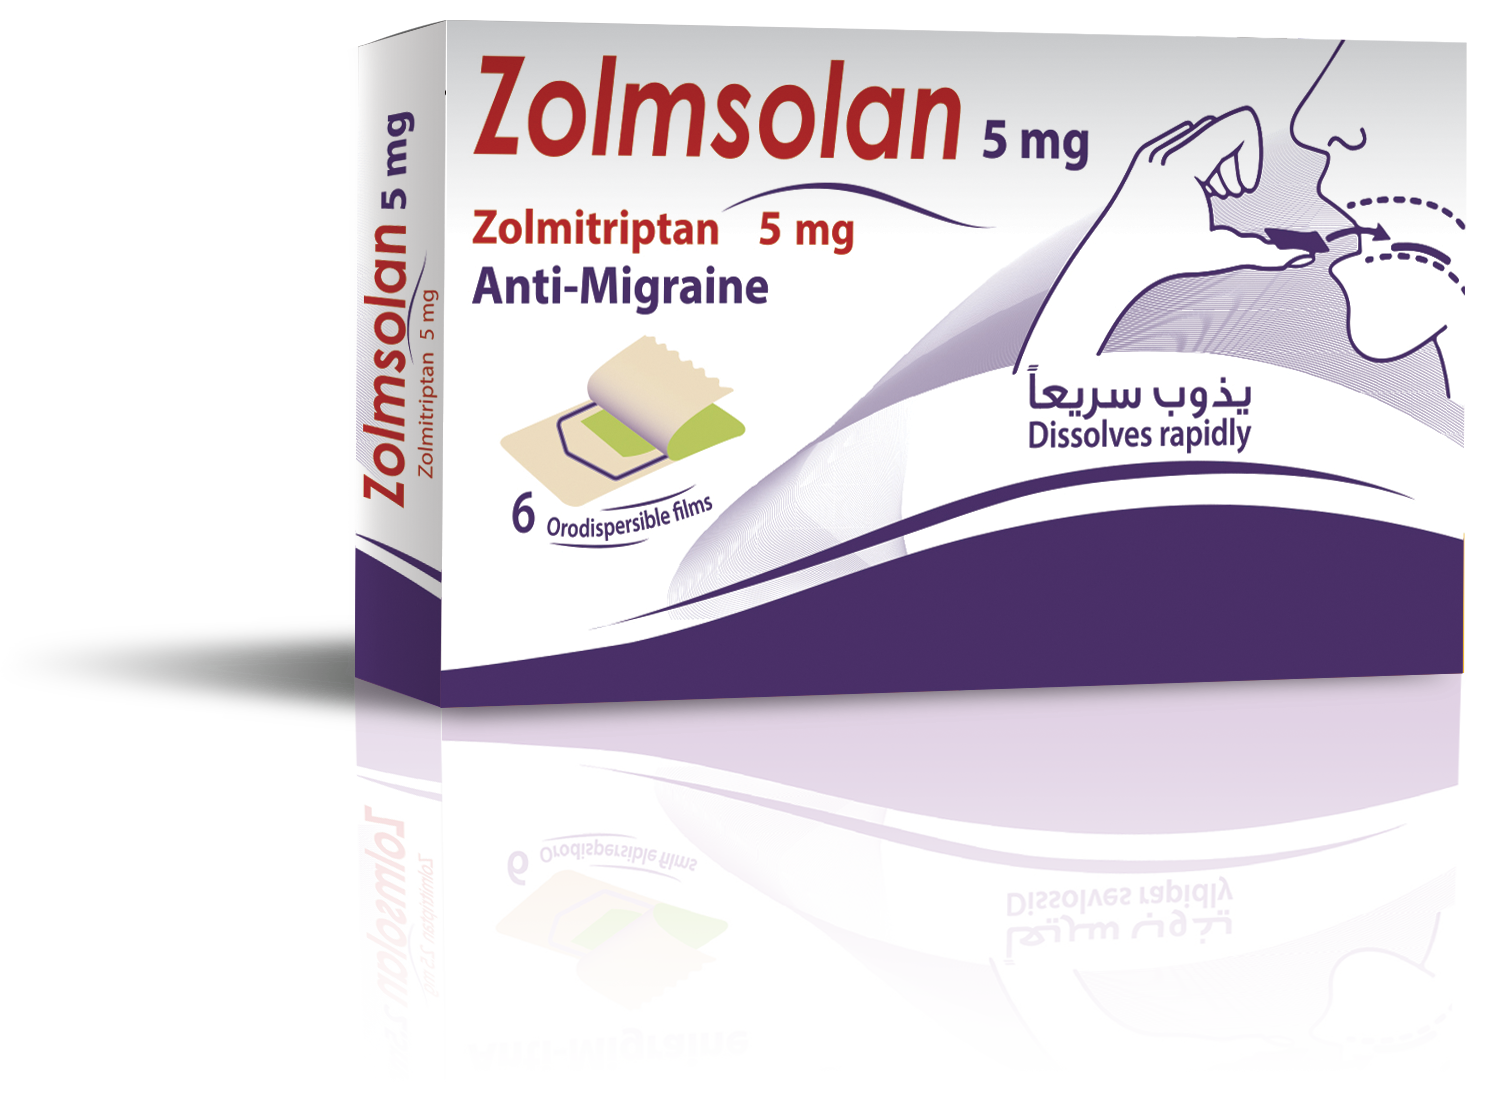 Zolmsolan … The first TRIPTANS ODF in the Egyptian Pharmaceutical Industry